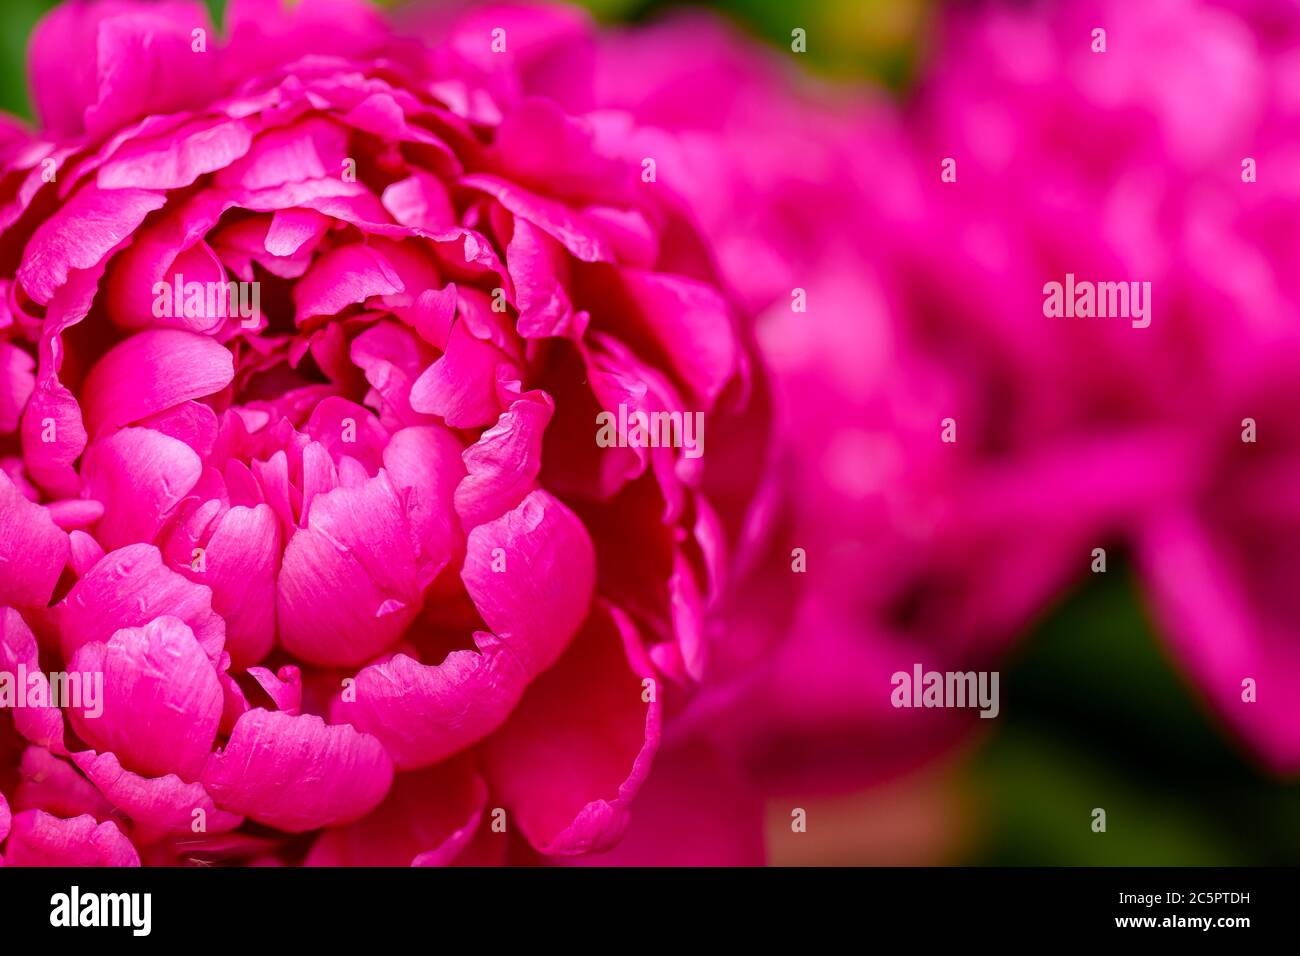 Selective focus on Peony Flower. Peony rose renaissance after rain close-up. Red Spring Flower. Peony close-up. Money flower of happiness. Stock Photo